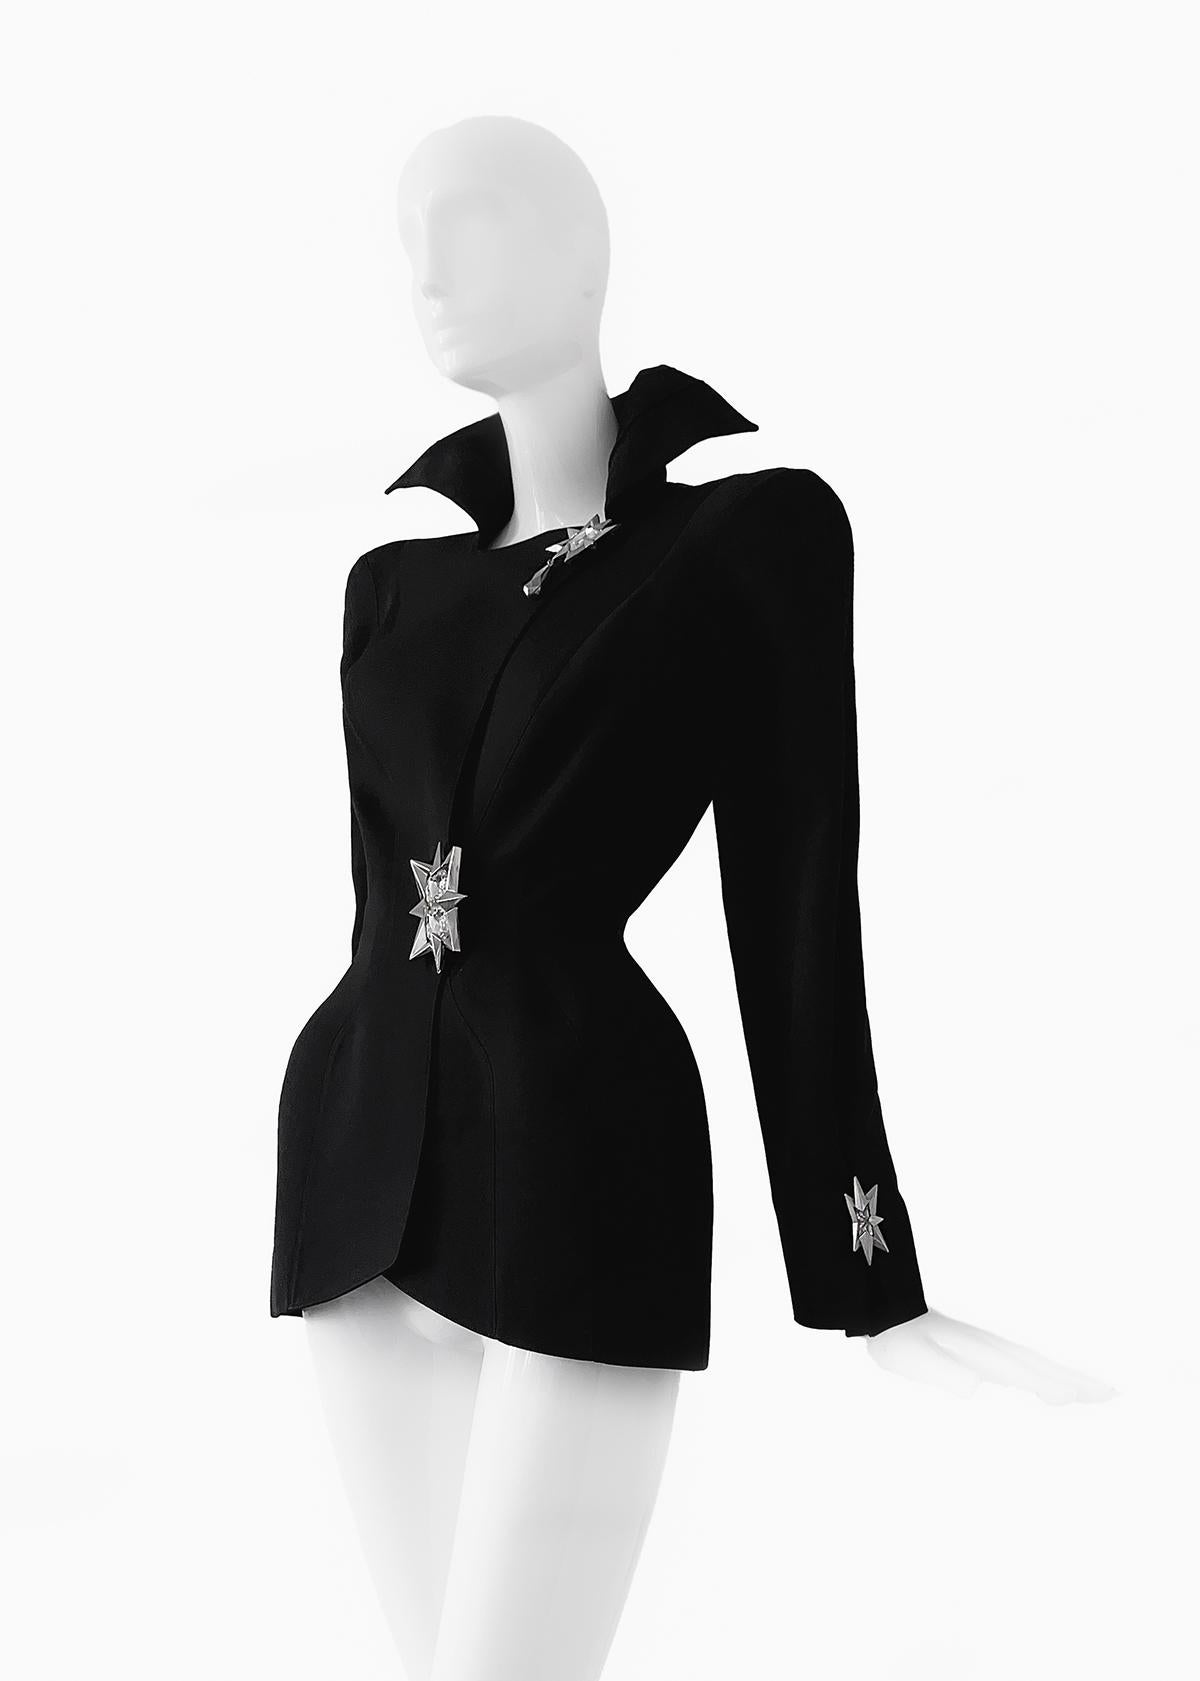 
ICONIC extremely rare Thierry Mugler piece

Museum worthy collectors piece
Fabulous Thierry Mugler jacket with breathtaking crystal jewel details. Assuming FW 1992 collection.
Dramatic Showstopper piece!
Black worsted wool blazer with icnoic